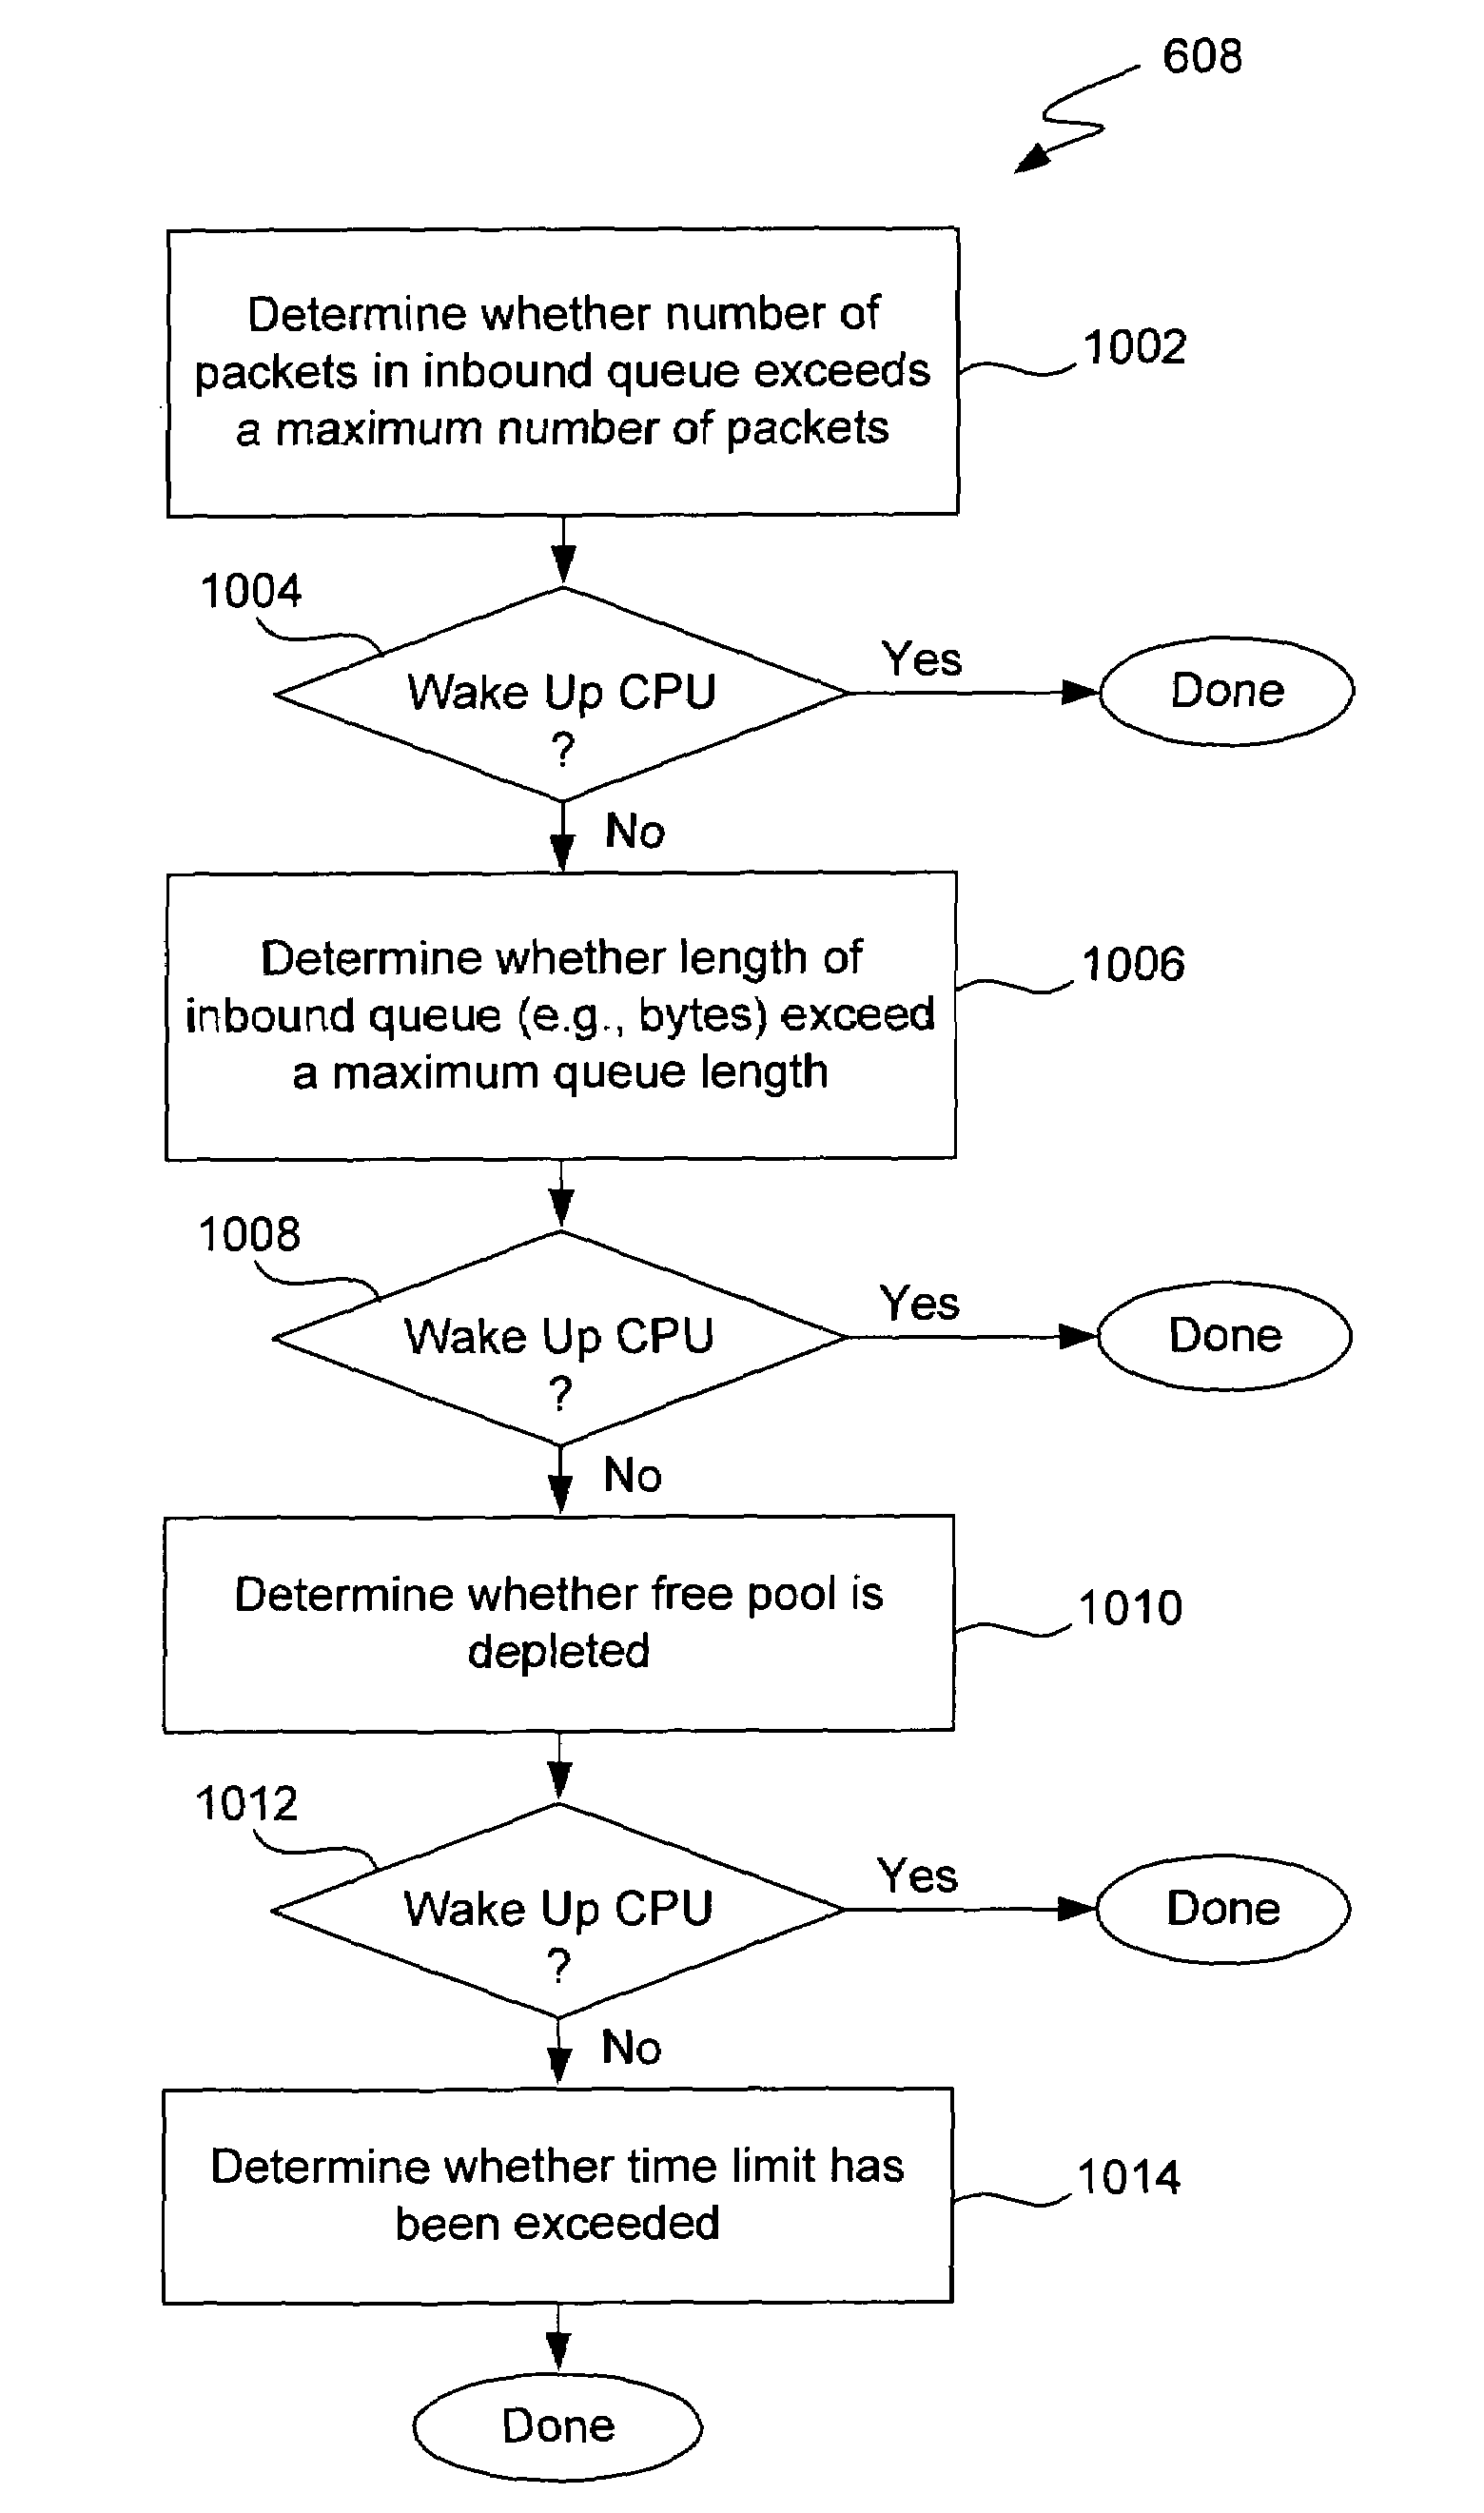 Reducing CPU overhead in the forwarding process in an inbound/outbound controller for a router